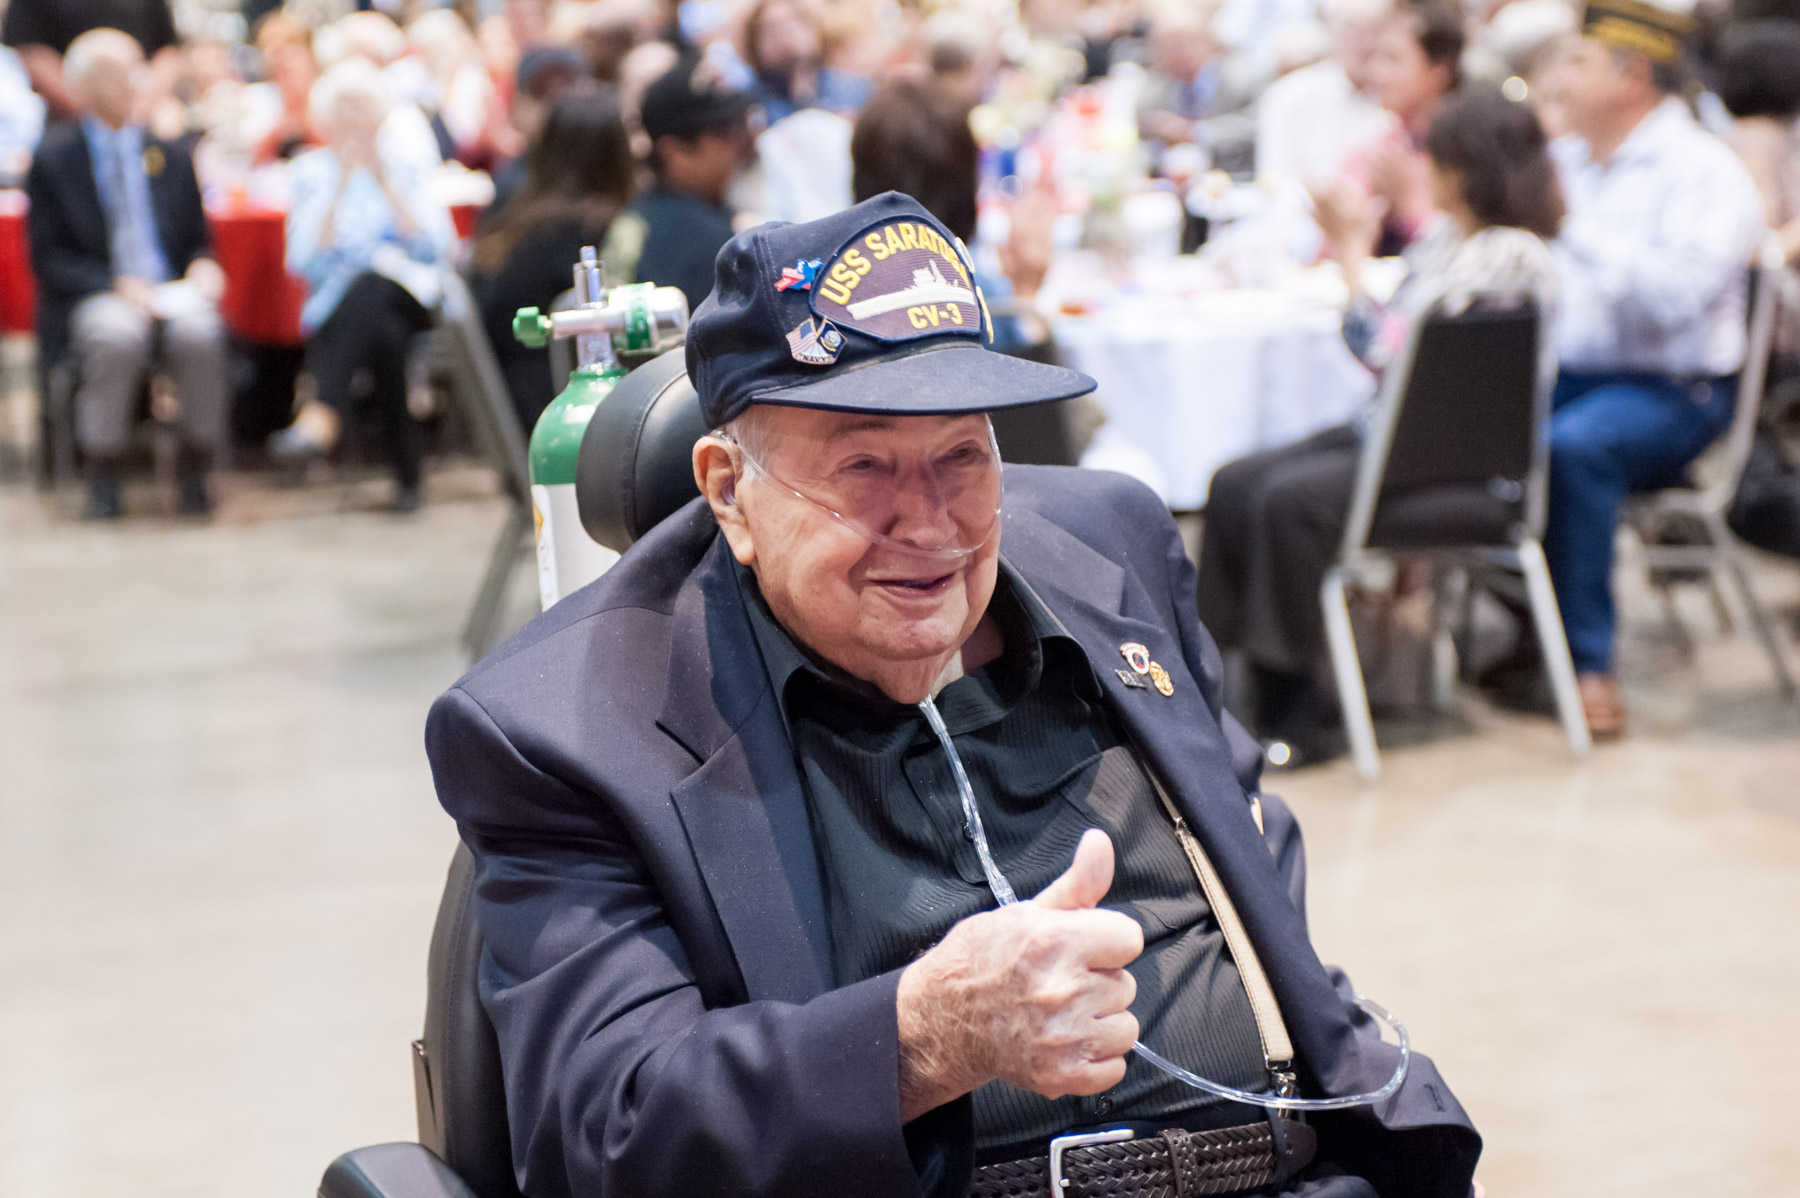 Shaie Williams for AGN Media. Armed Forces Day Banquet  in Amarillo, TX Held at the Amarillo Civic Center on May 21, 2016.